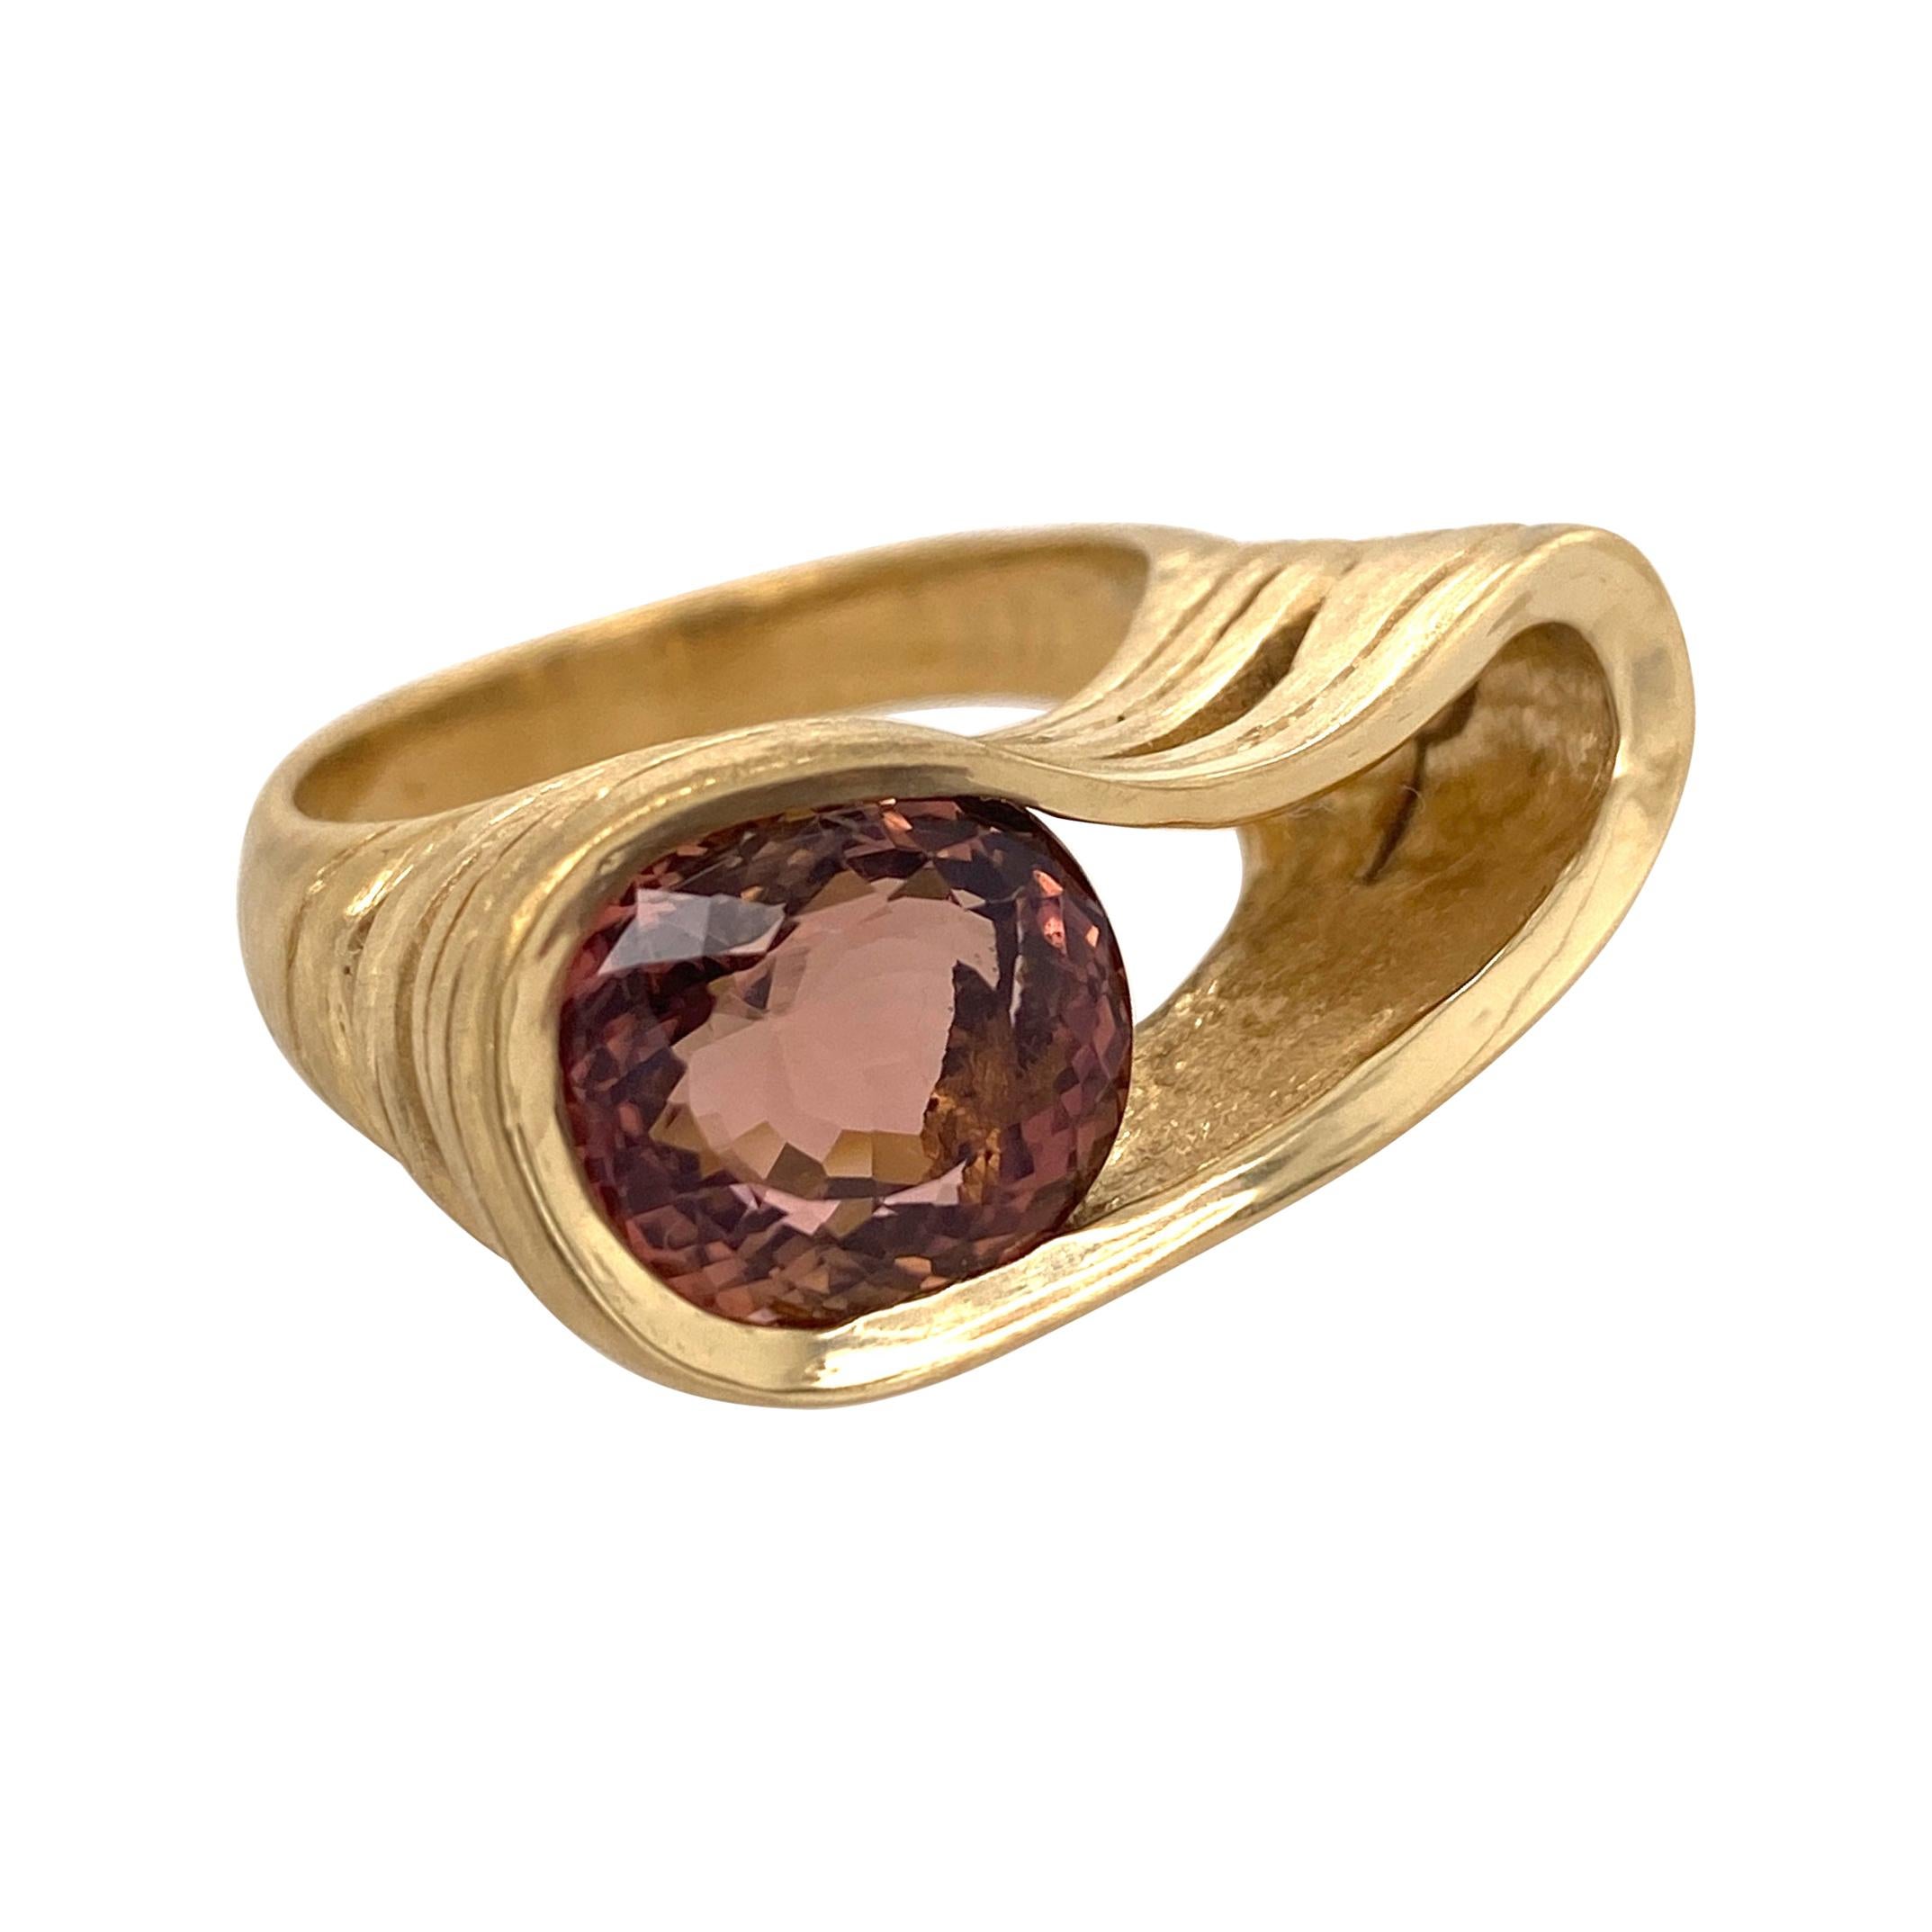 "Unraveling" Modern Cocktail Ring with Pink Tourmaline in 18 Karat Yellow Gold